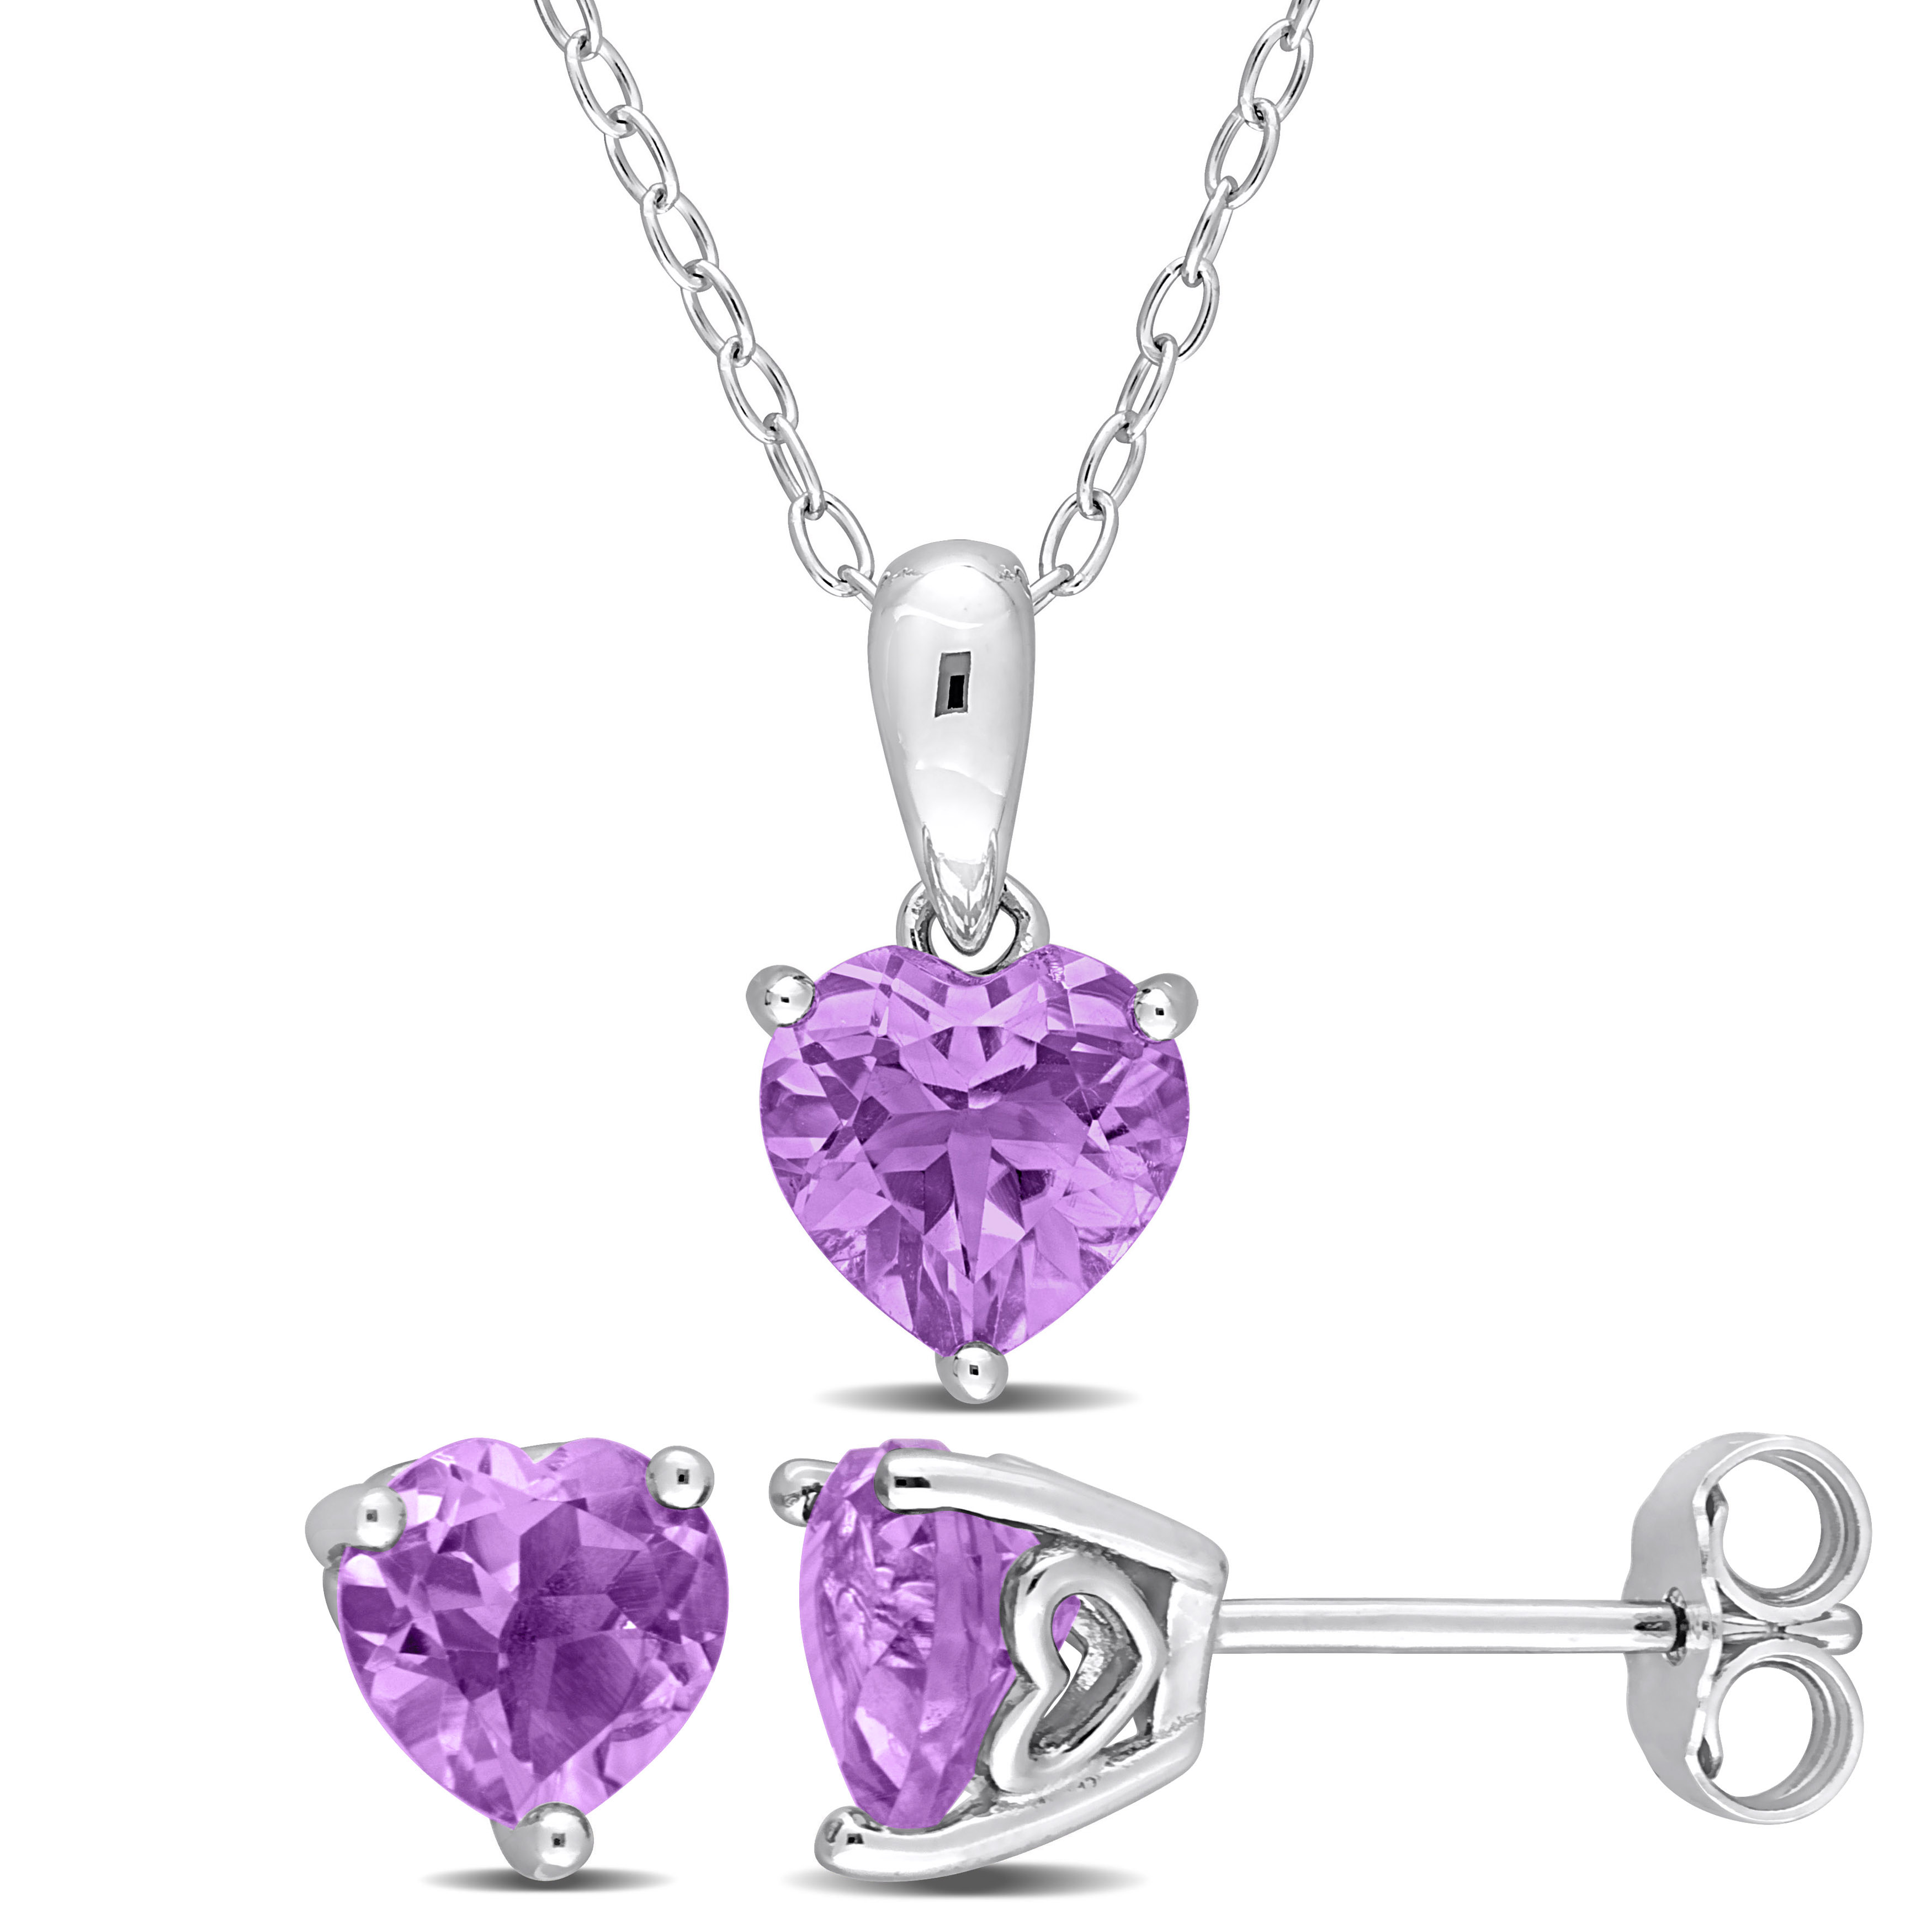 2 1/10 CT TGW Heart-Shape Amethyst 2-Piece Set of Pendant with Chain and Earrings in Sterling Silver